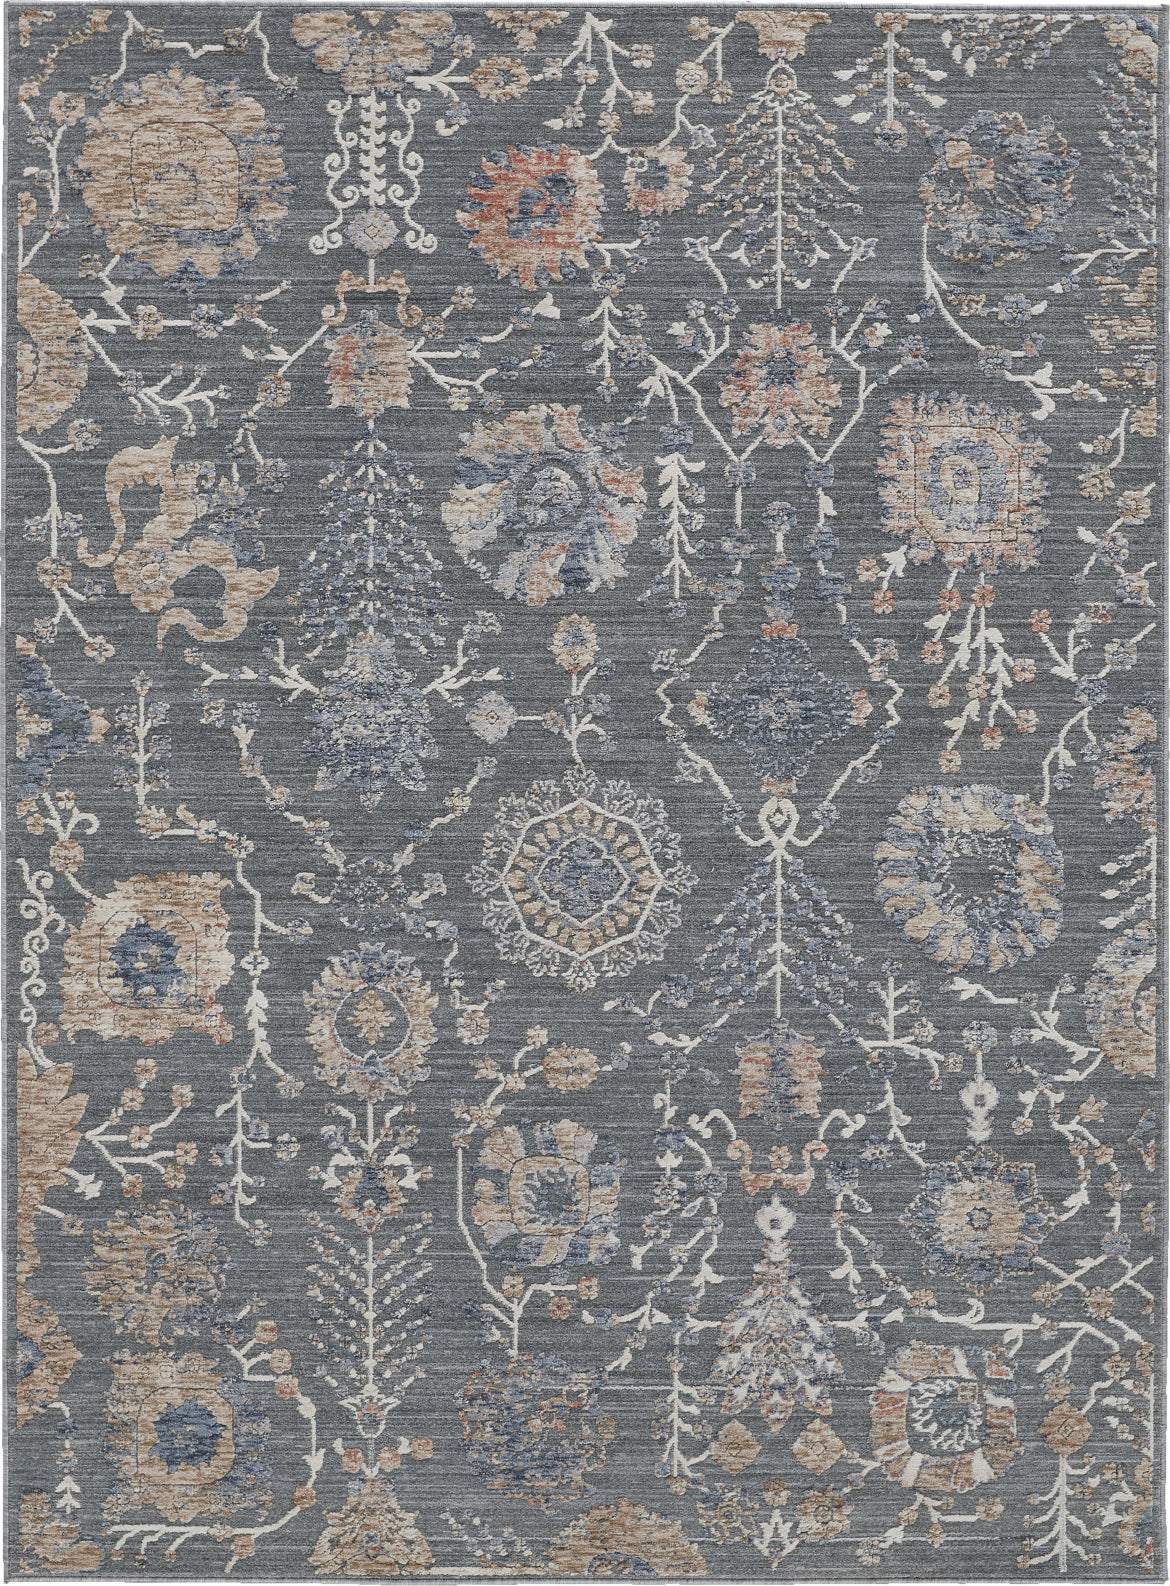 Feizy Thackery 39D0F Charcoal/Beige Area Rug main image